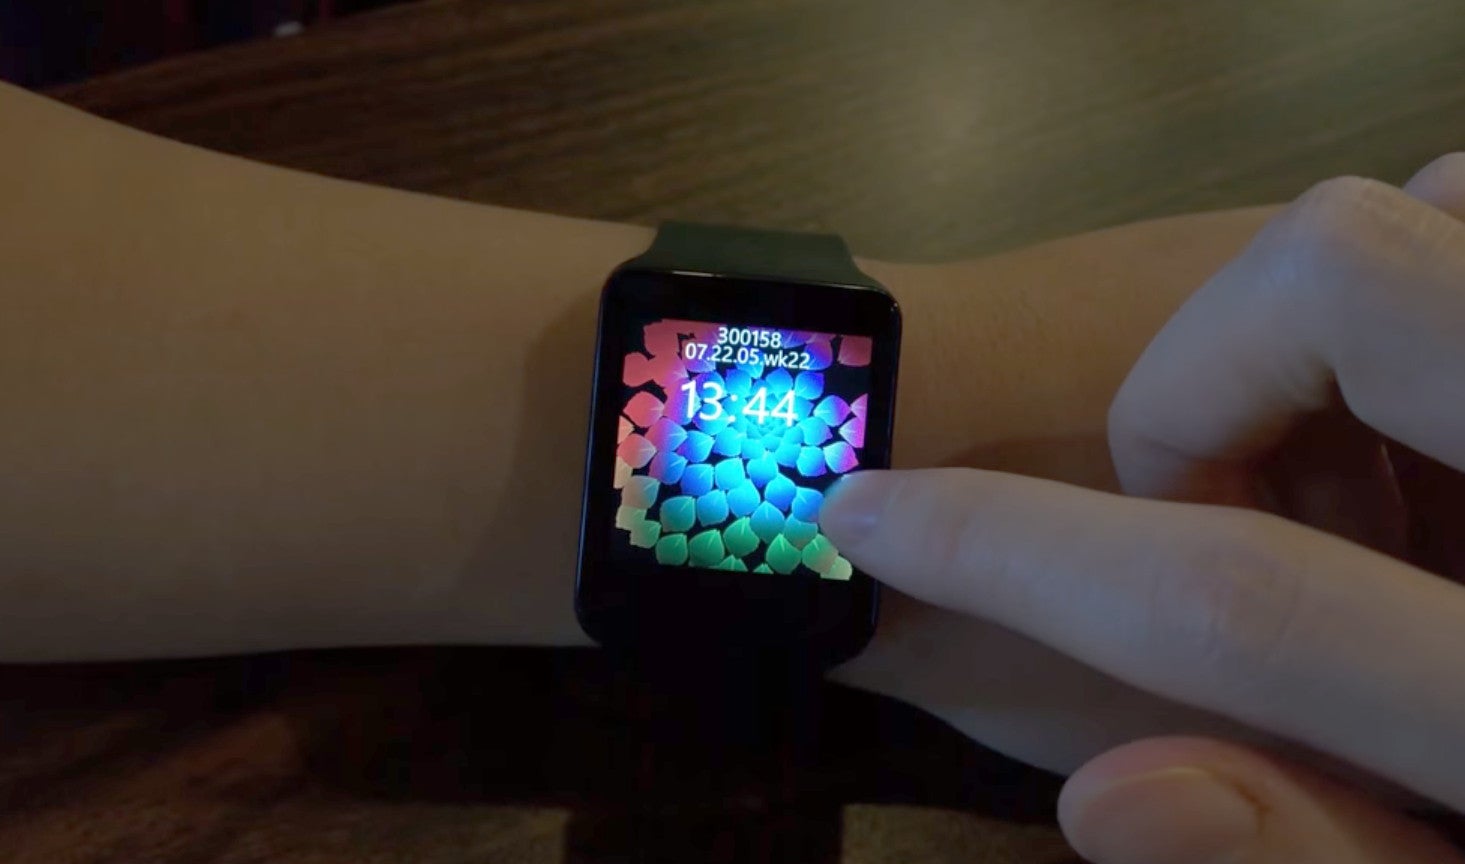 Microsoft's canceled Nokia Moonraker smartwatch shown in hands-on video